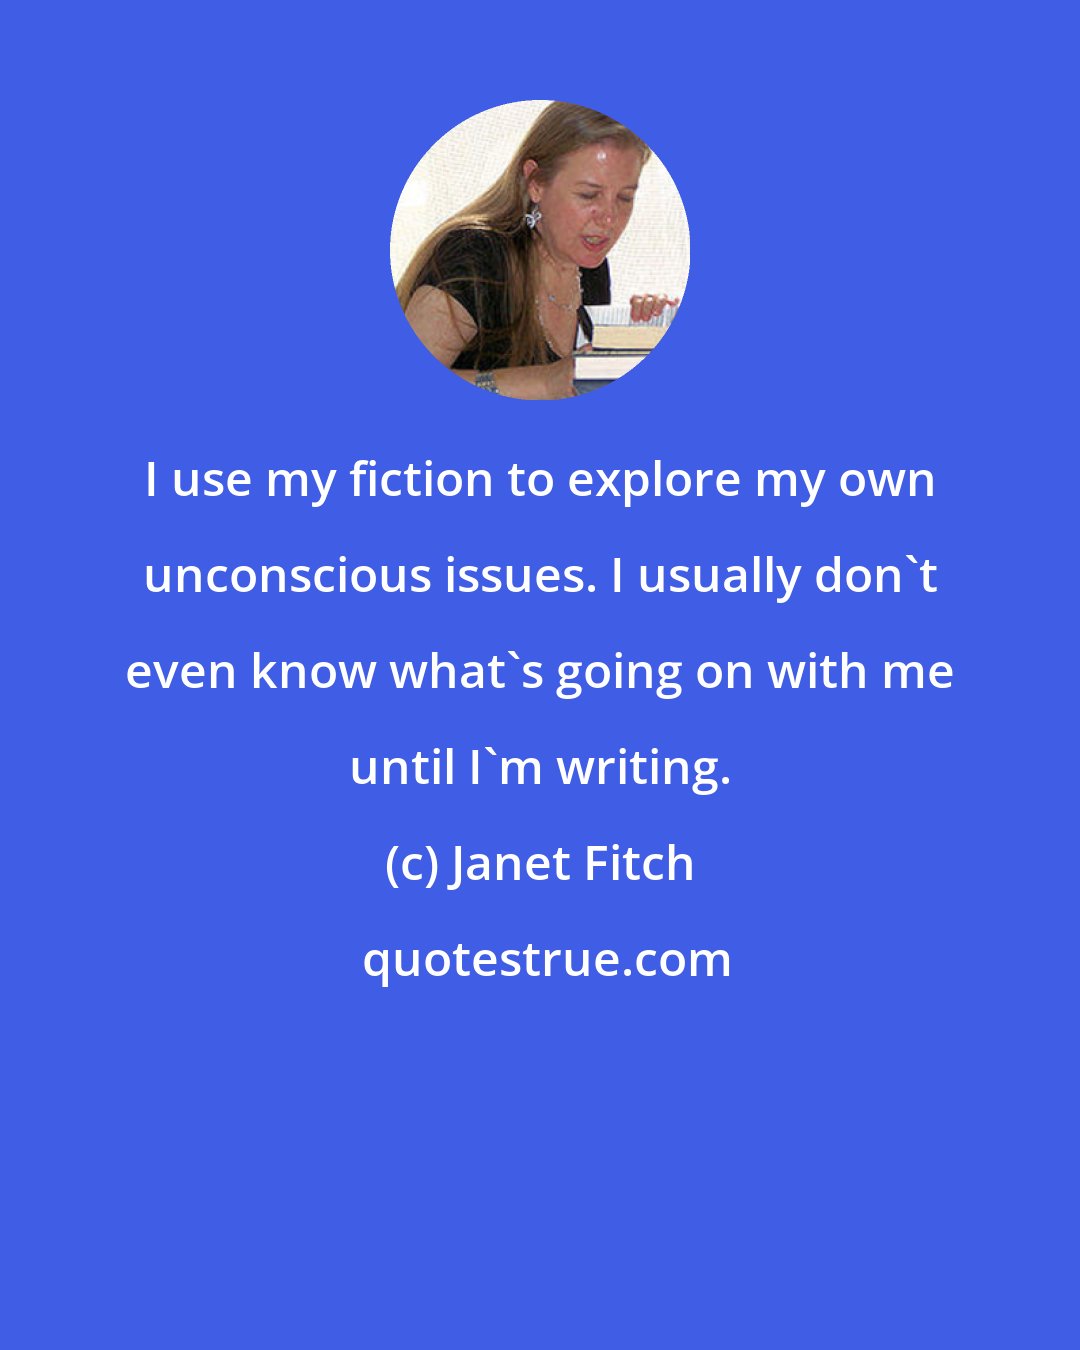 Janet Fitch: I use my fiction to explore my own unconscious issues. I usually don't even know what's going on with me until I'm writing.